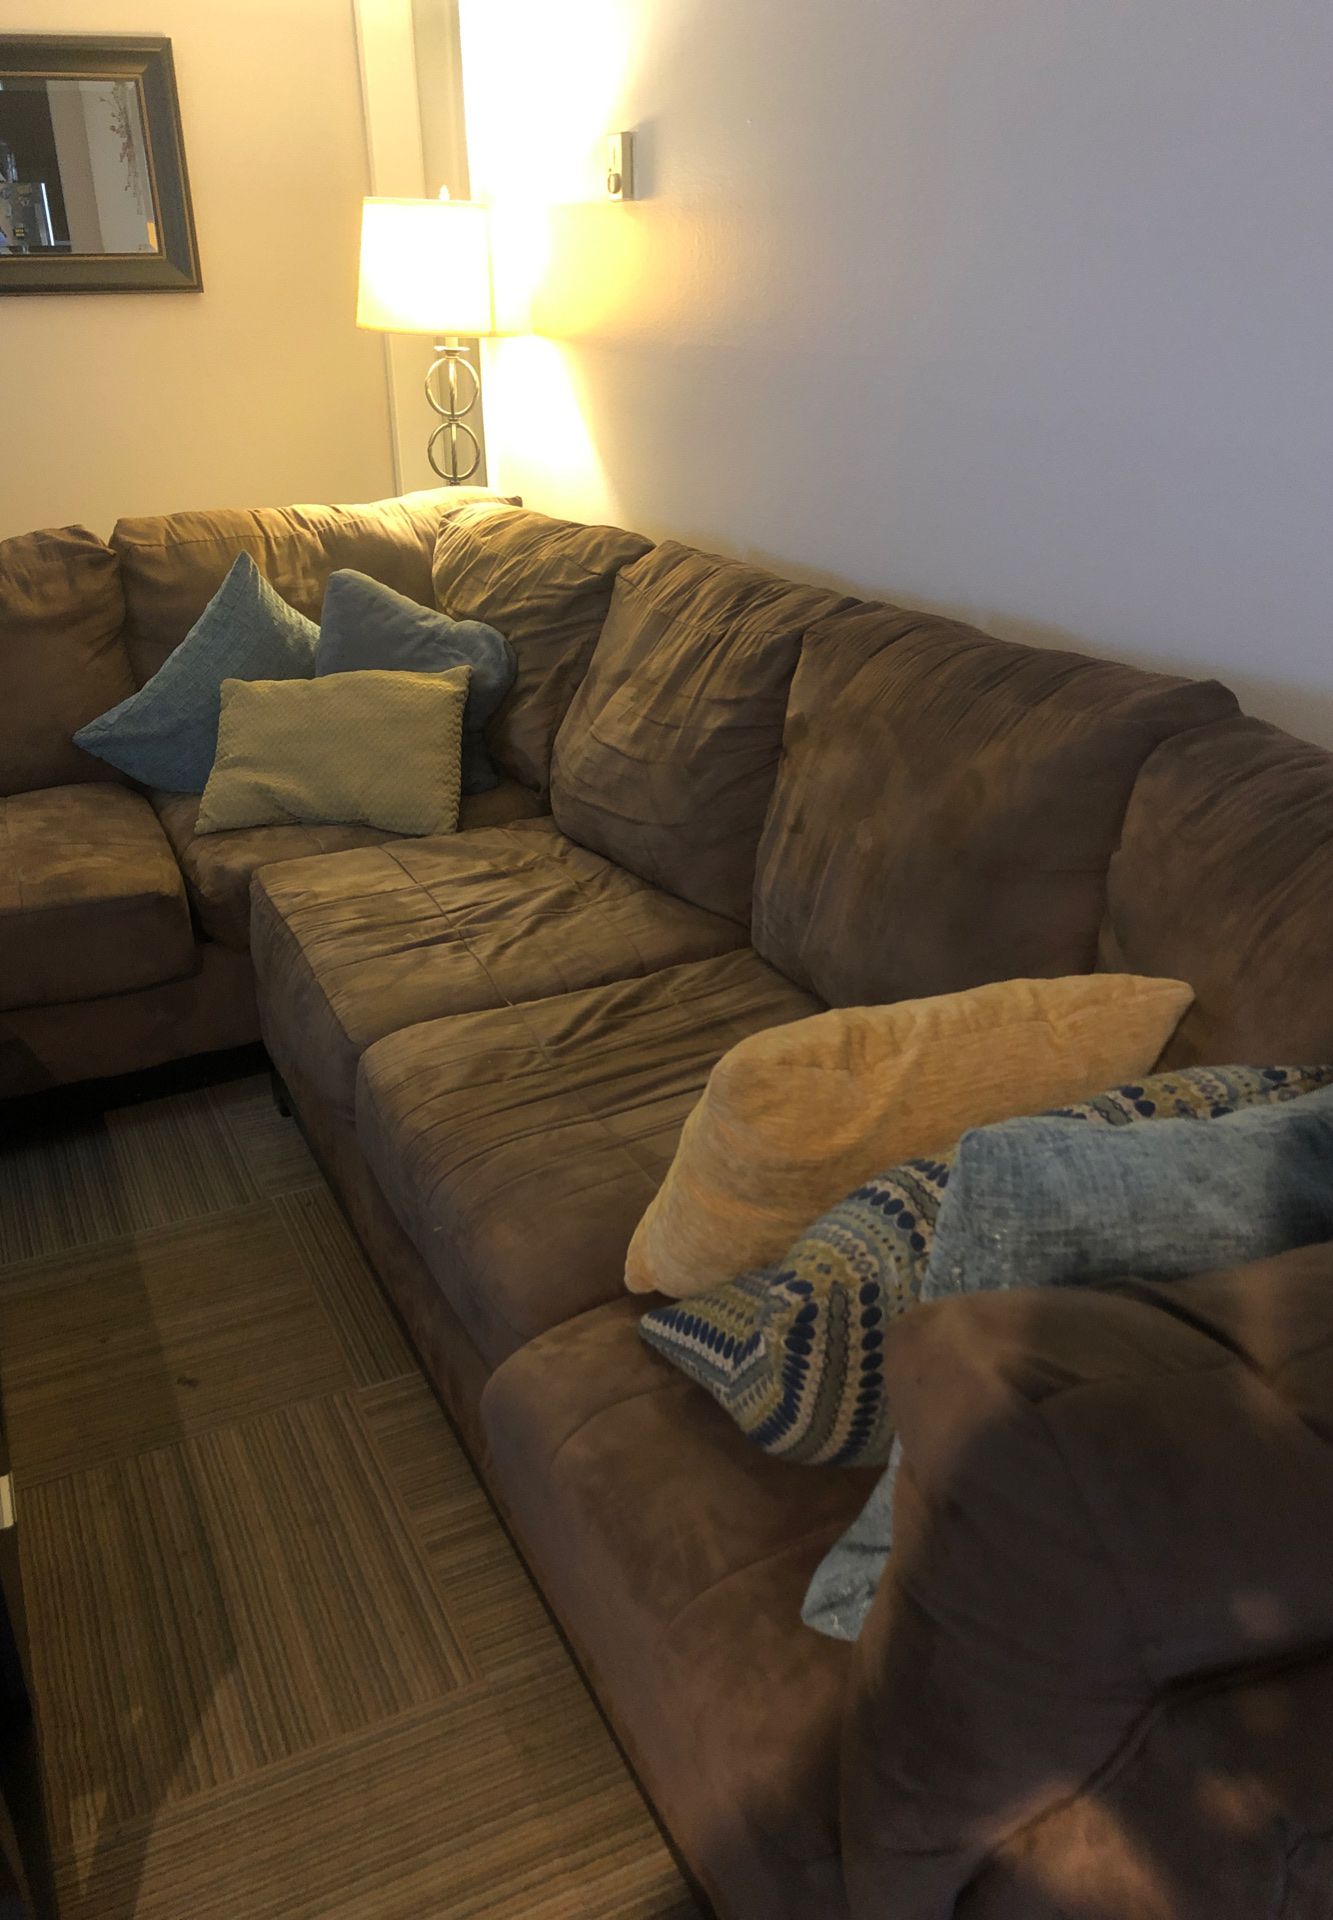 Sectional couch for sale- has to go ASAP!